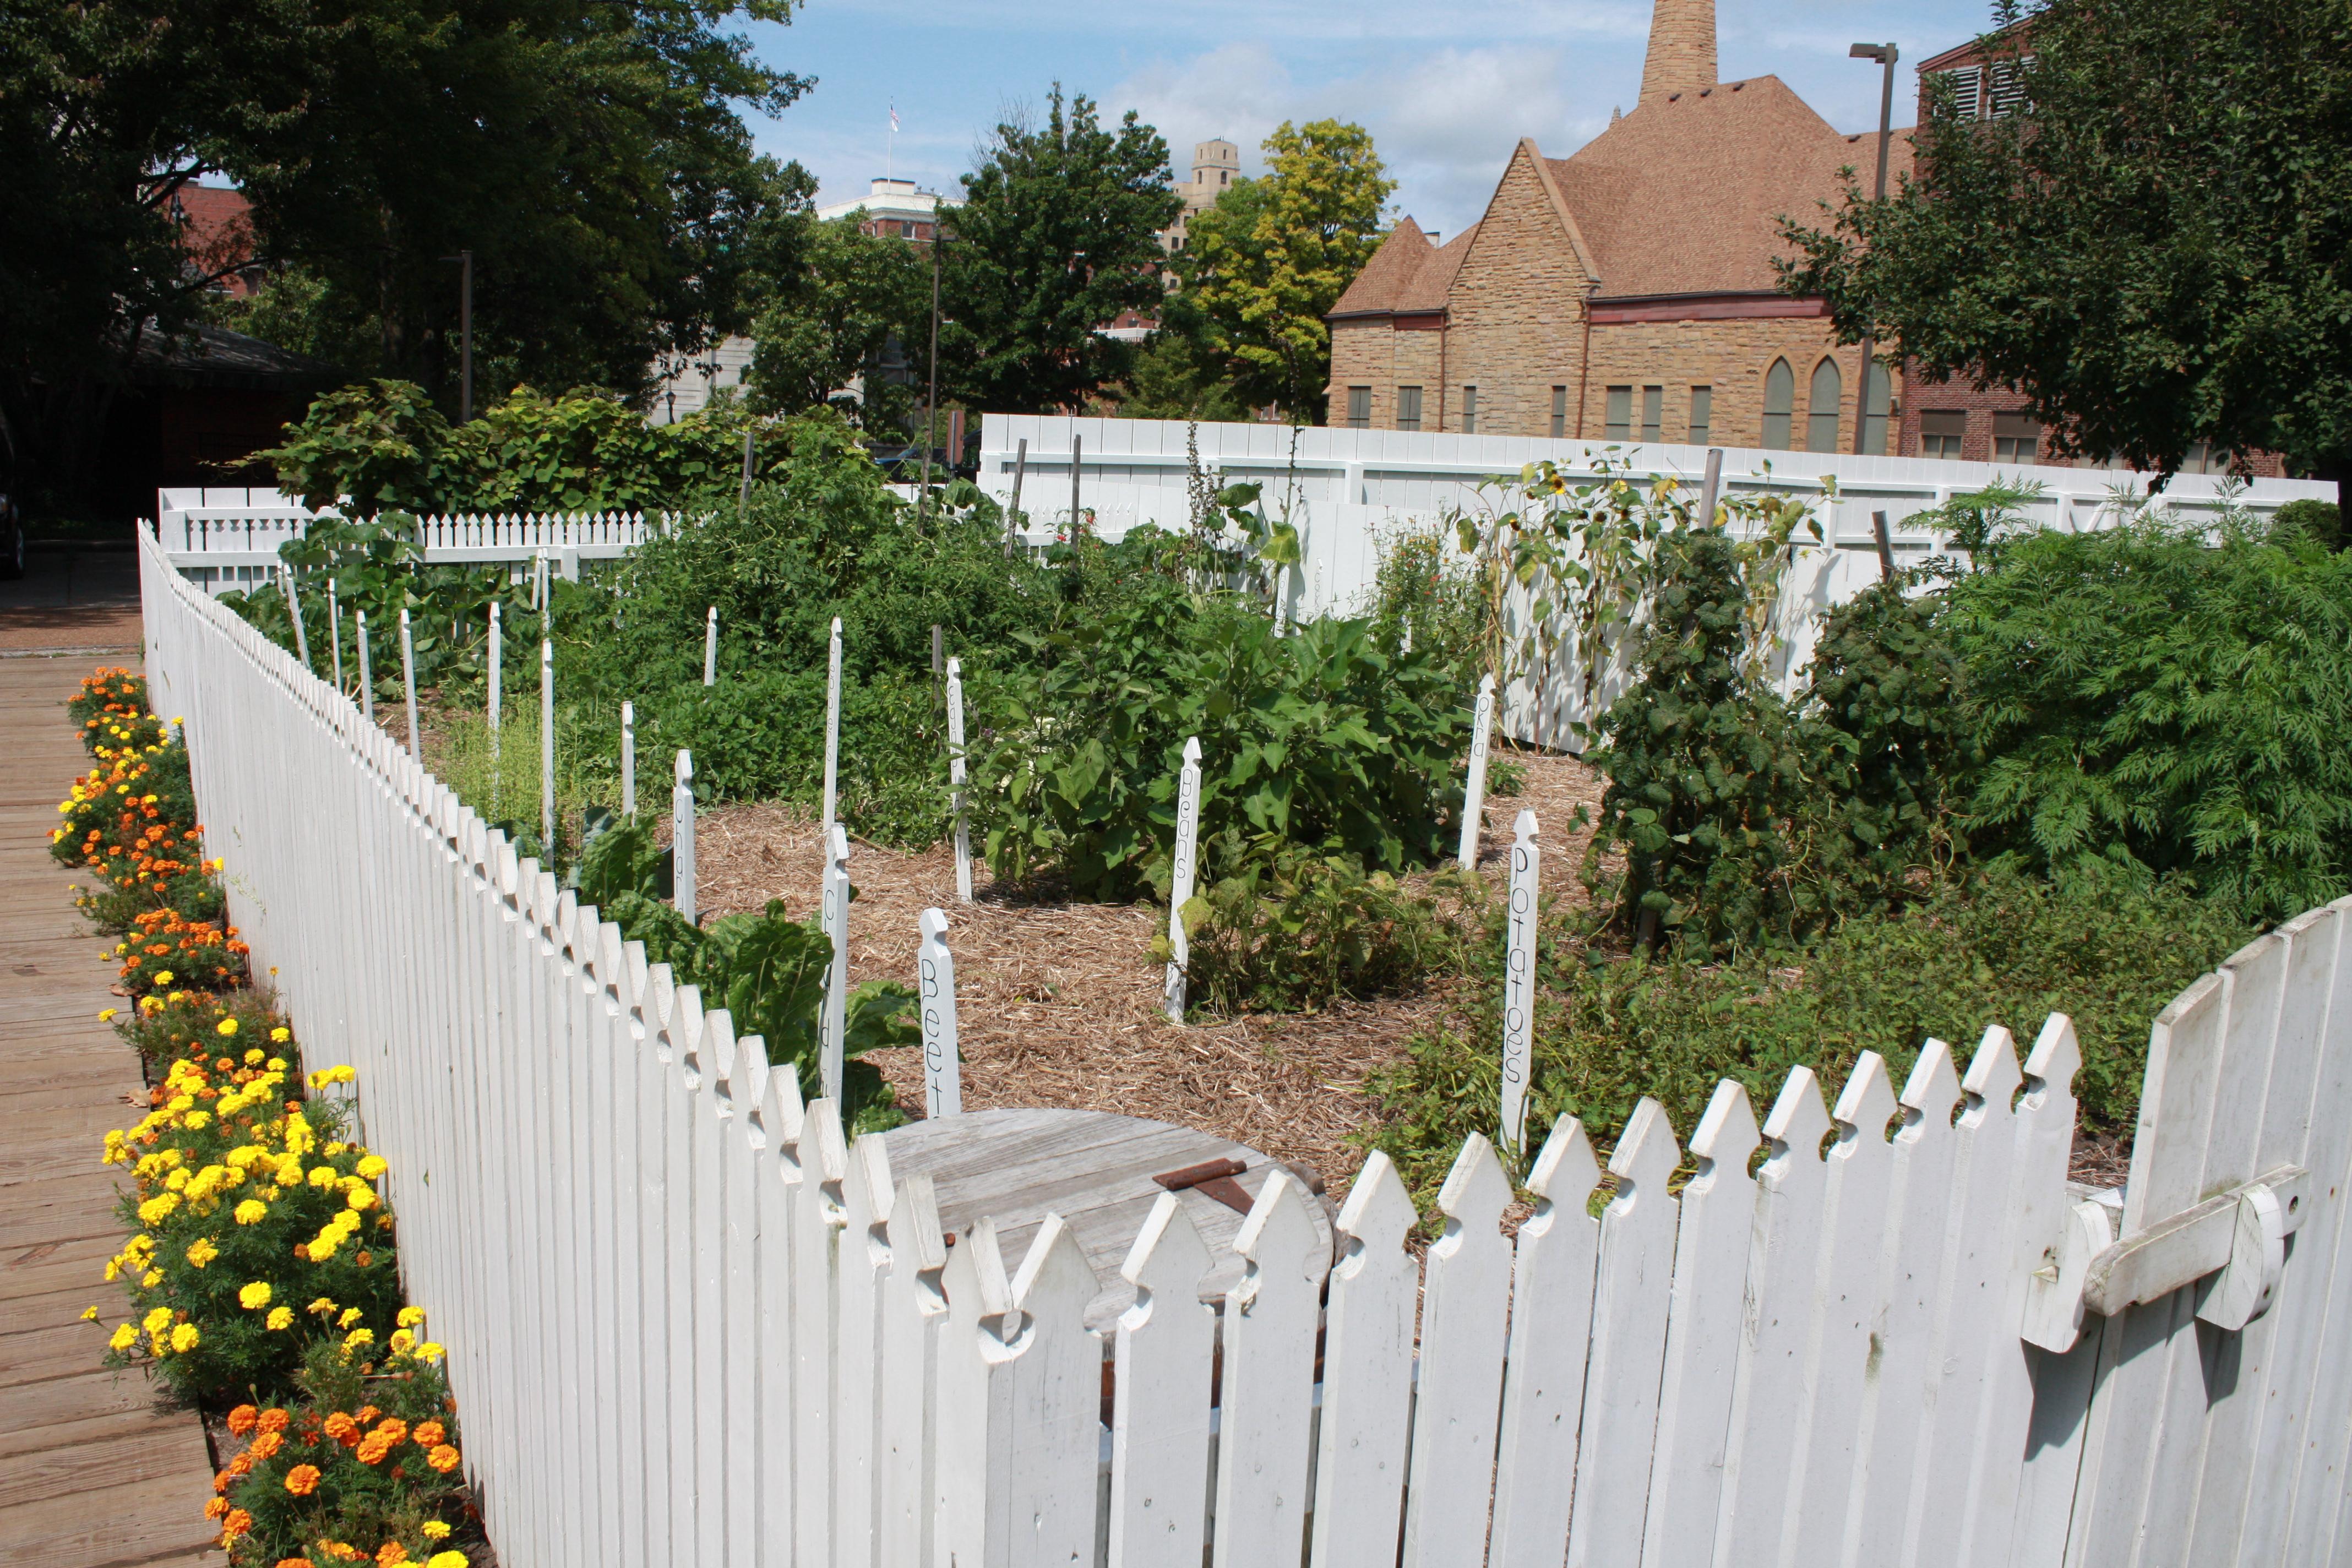 Garden with green plants surrounded by white picket fence